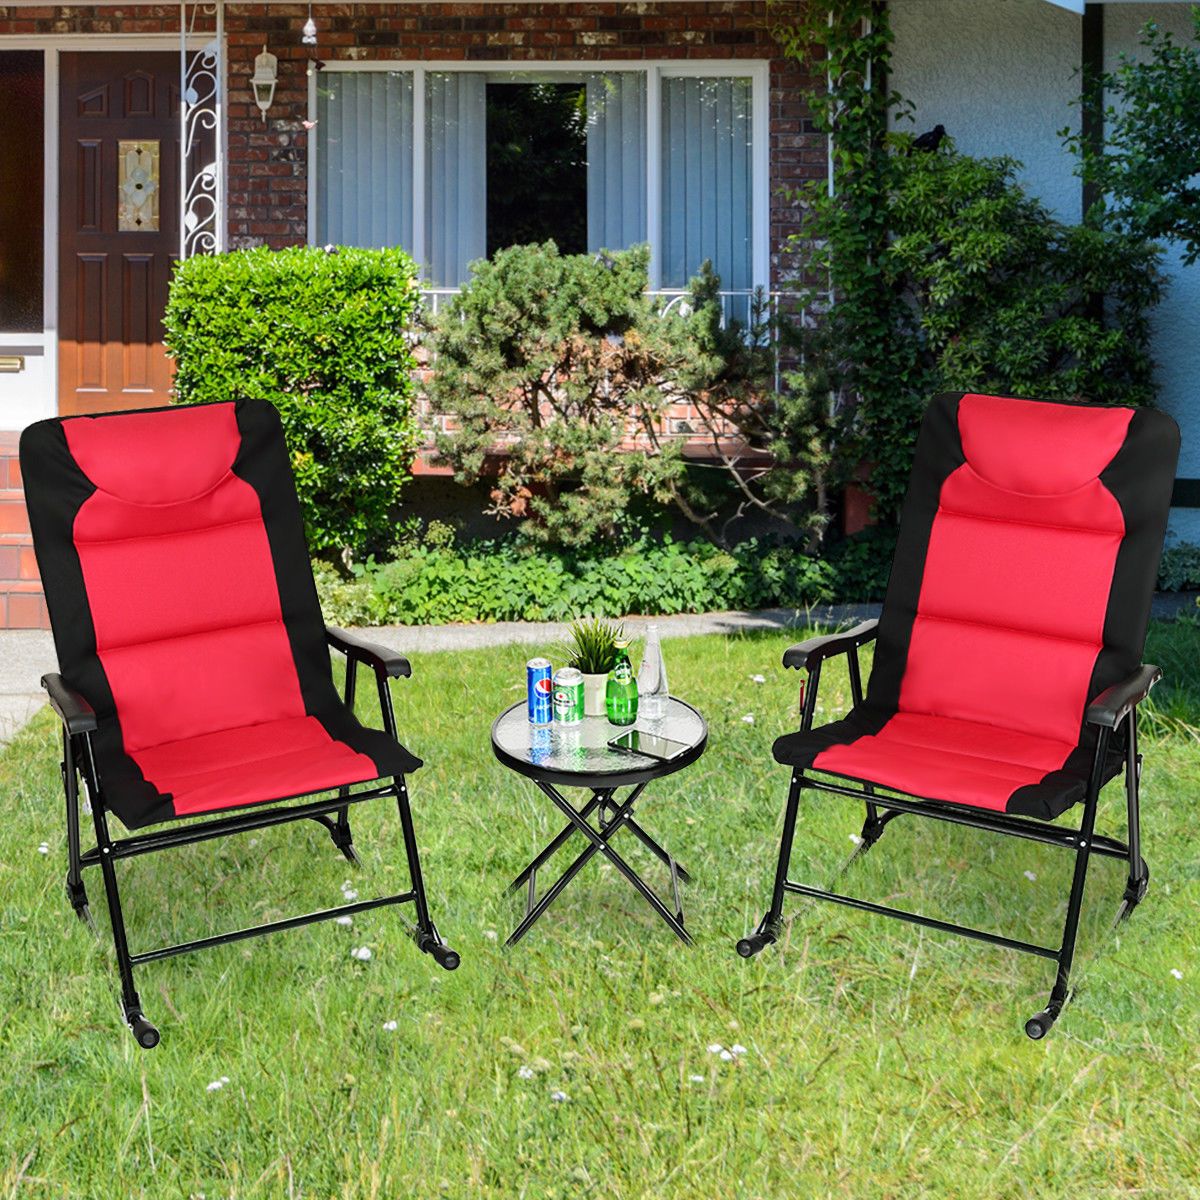 Widely Used Blue 3 Piece Outdoor Seating Sets Intended For Goplus Red 3 Piece Outdoor Folding Rocking Chair Table Set Bistro Sets (View 4 of 15)